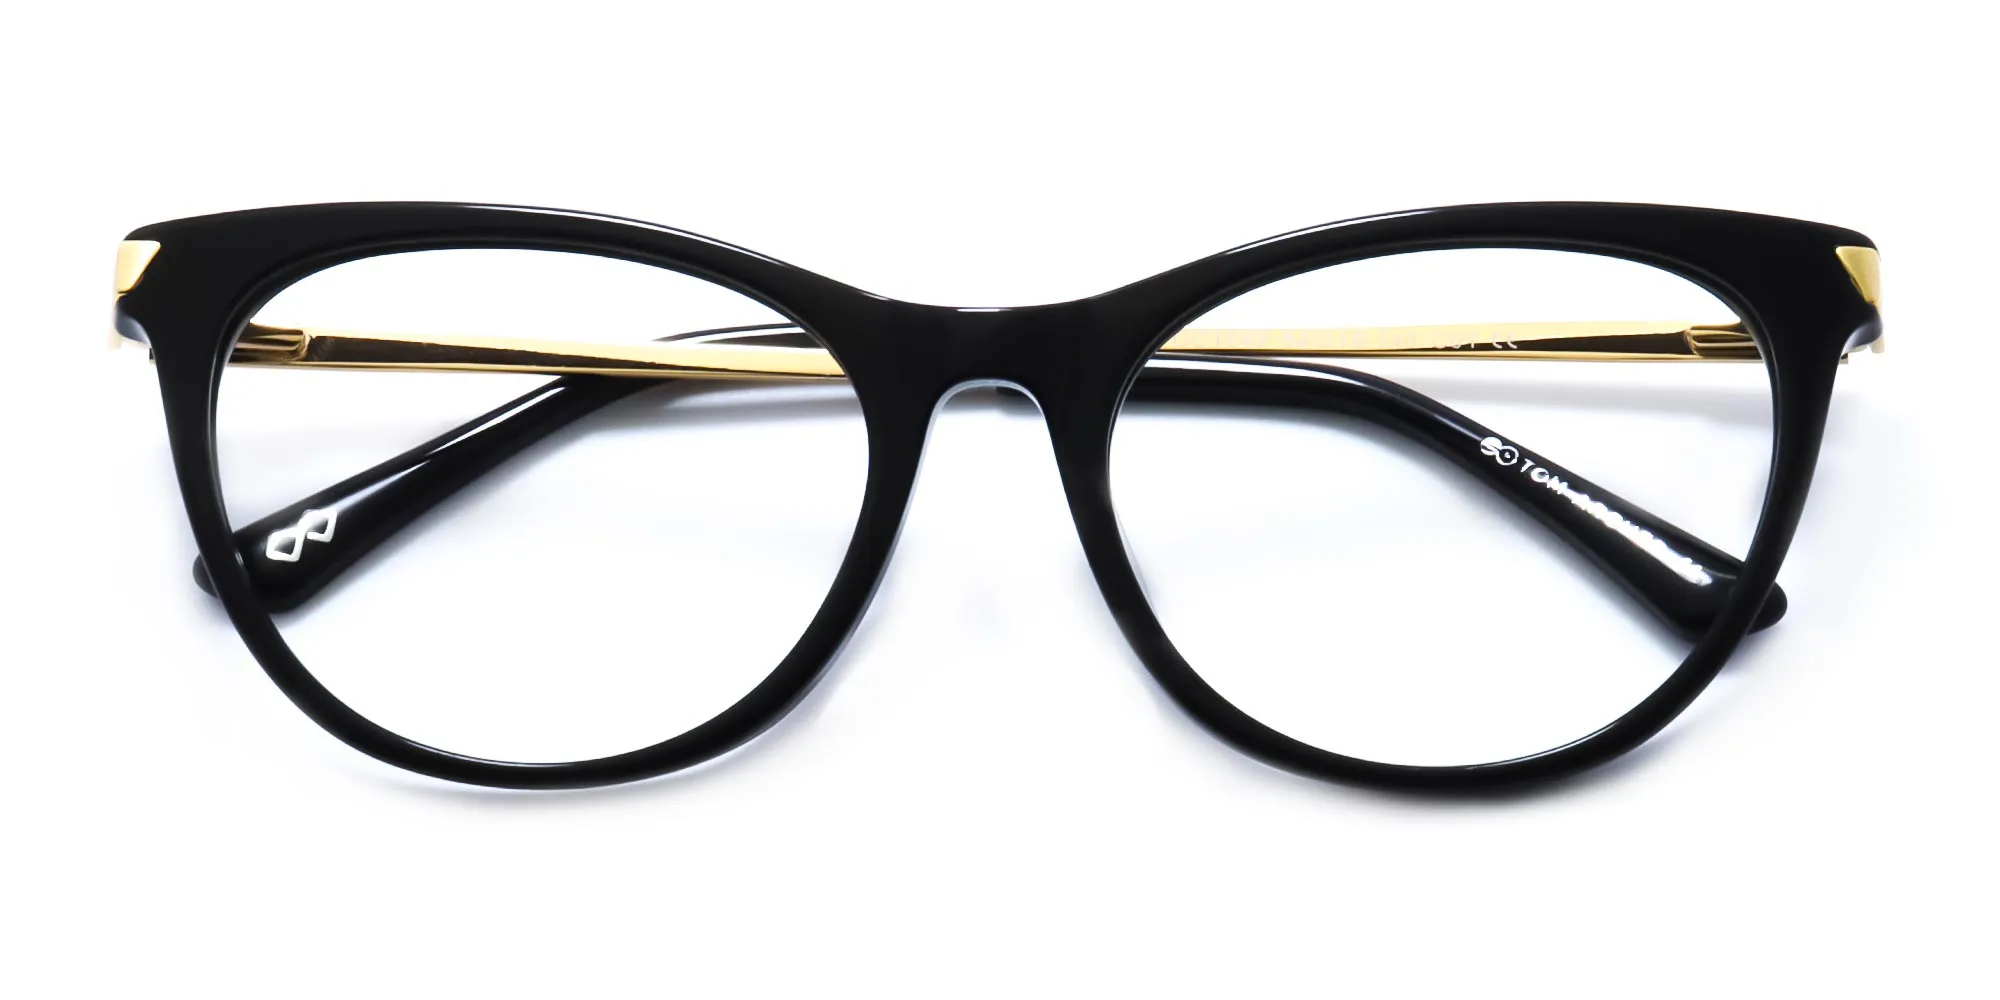 cat eye glasses black and gold specscart-2